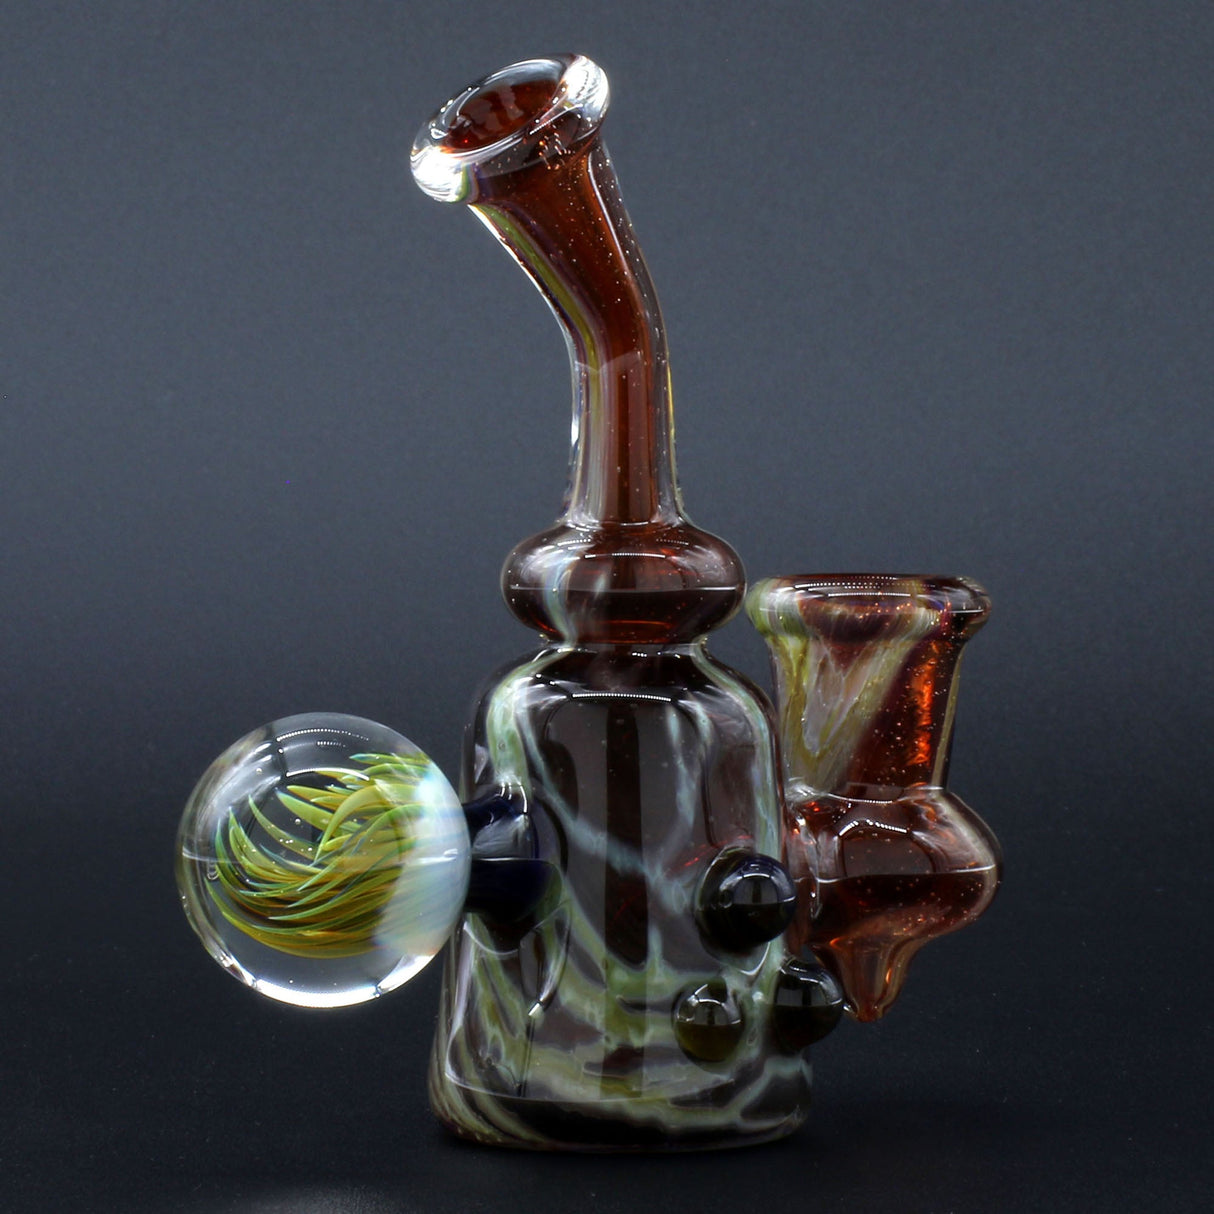 Clayball Glass "Blood Moon" Heady Sherlock Dab Rig, 5" tall, for concentrates, front view on black